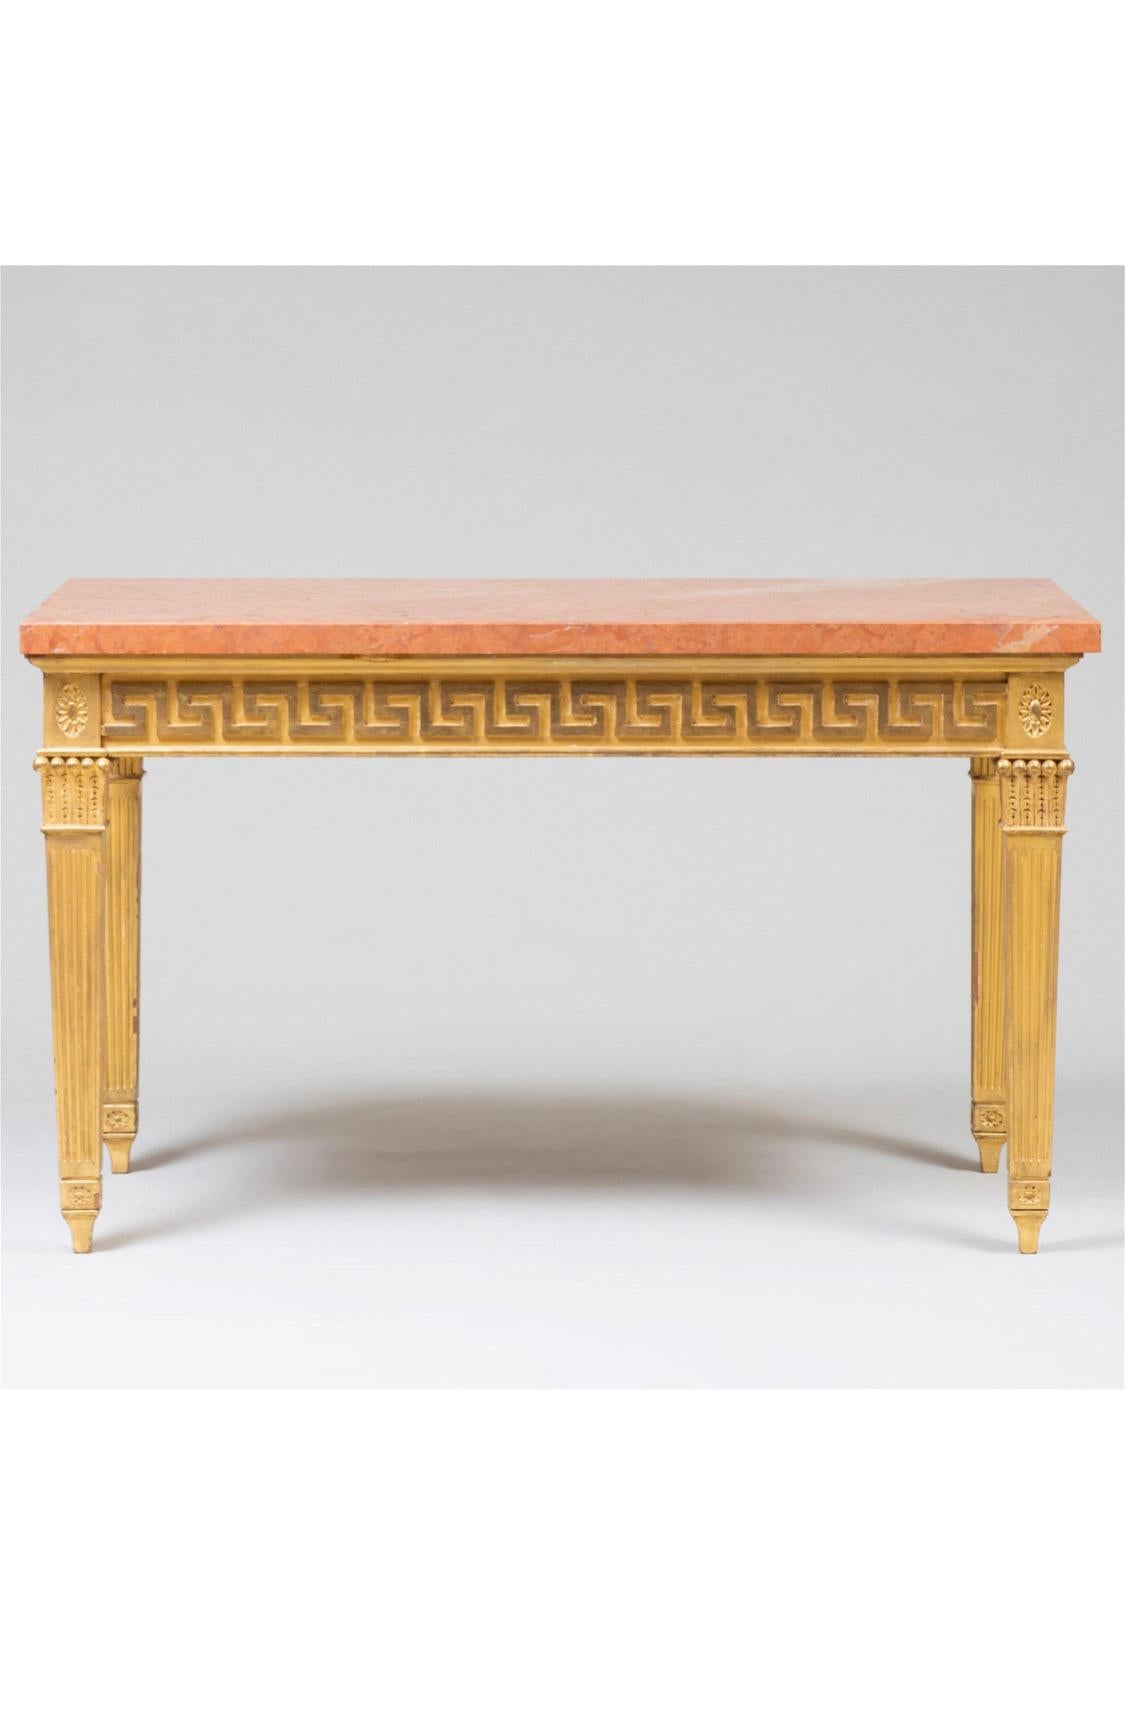 George III style giltwood and Marble console table
A handsome and authentic looking reproduction. Giltwood frame with fluted, tapered legs, Greek key apron, and rosette corners. Marble top sitting on top.
Condition: Very minor nicks to the edges of